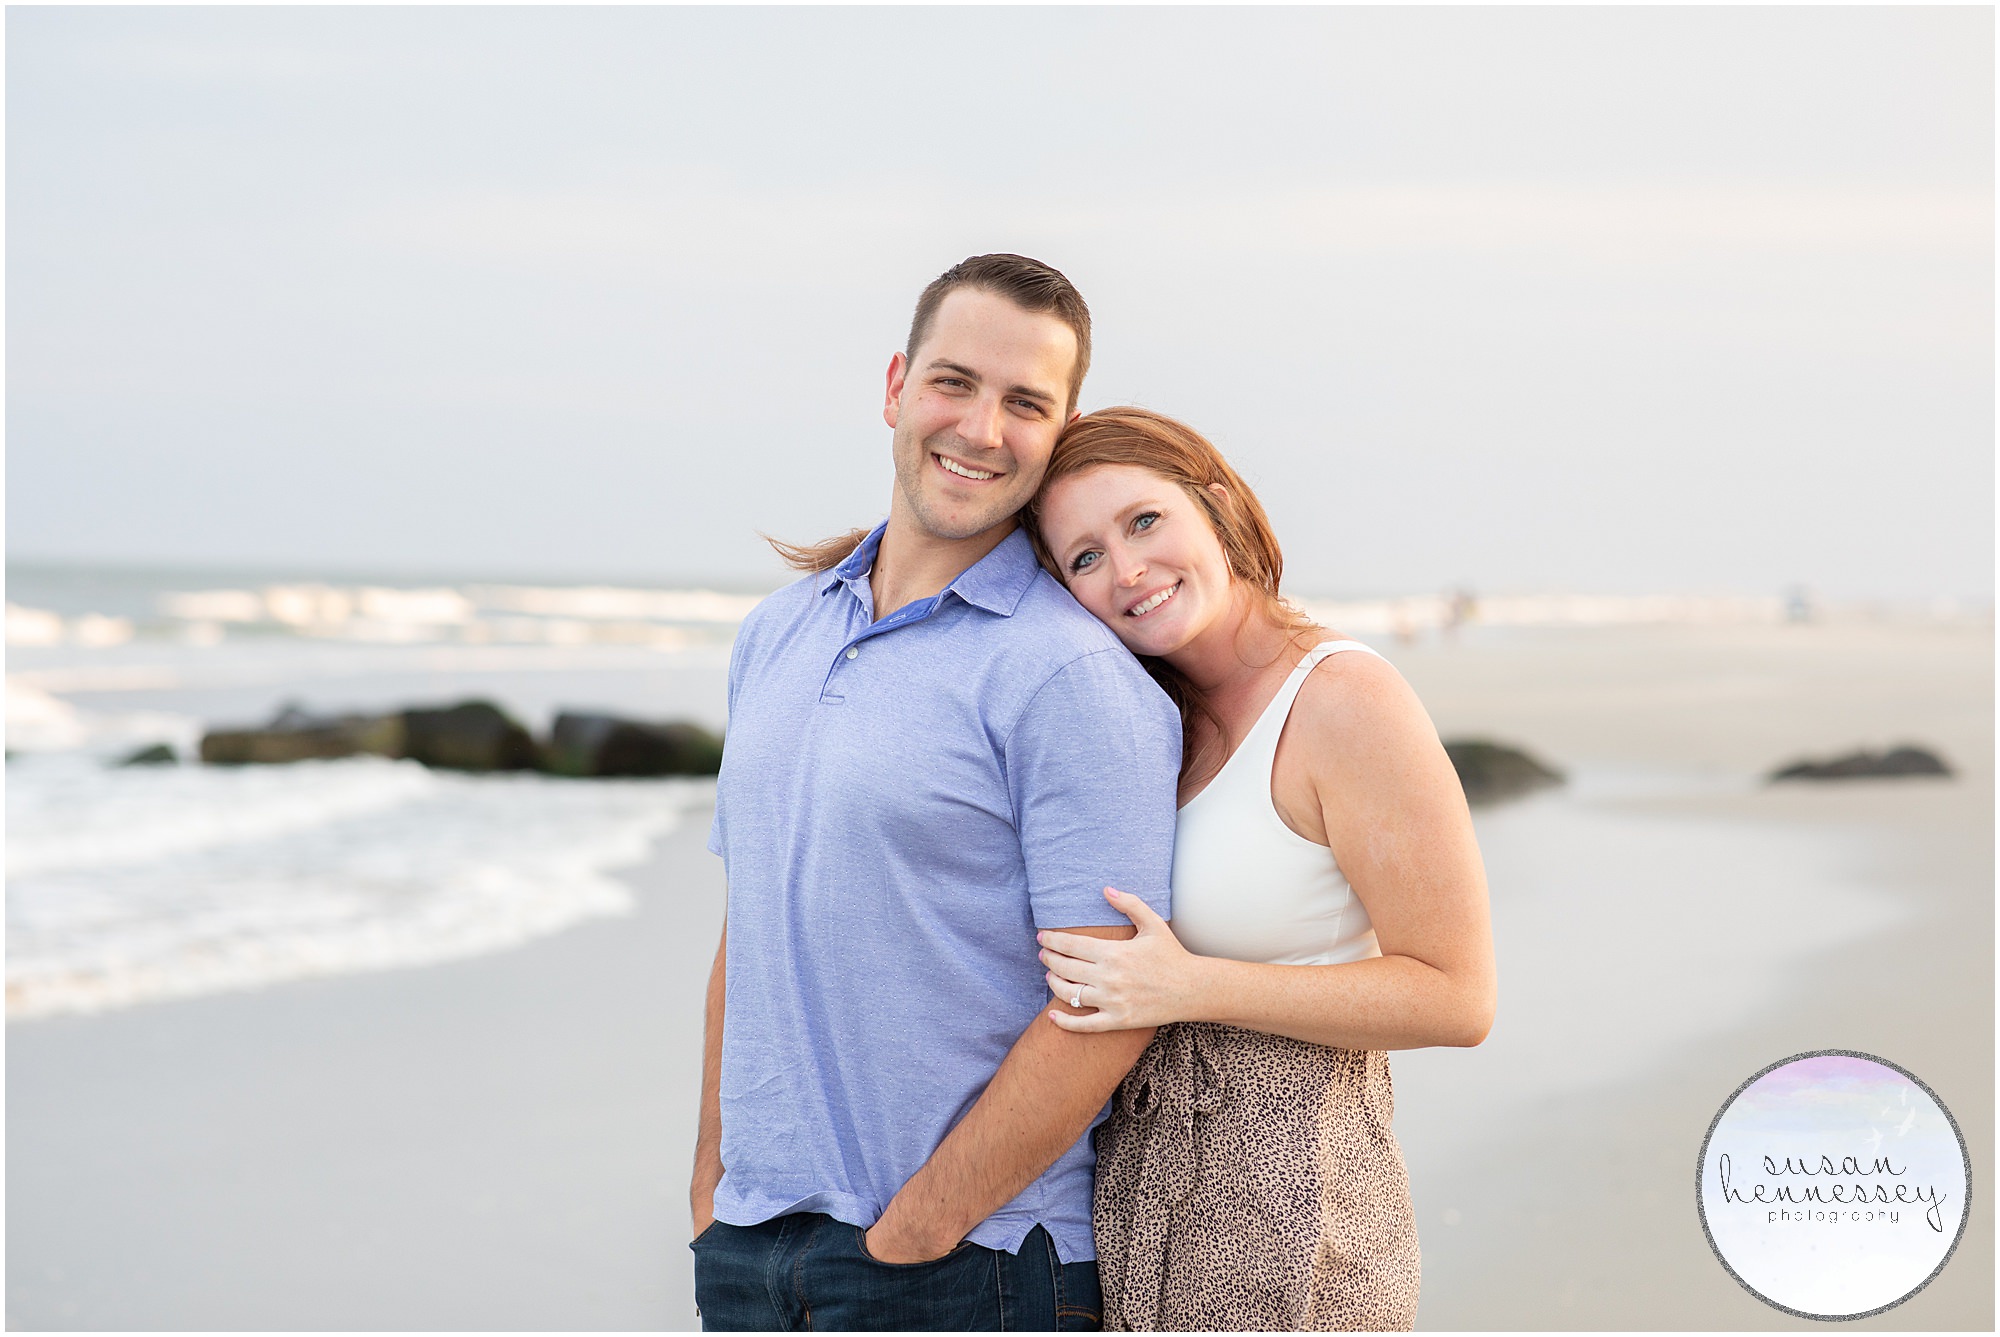 Engagement session after the surprise proposal in Stone Harbor, NJ